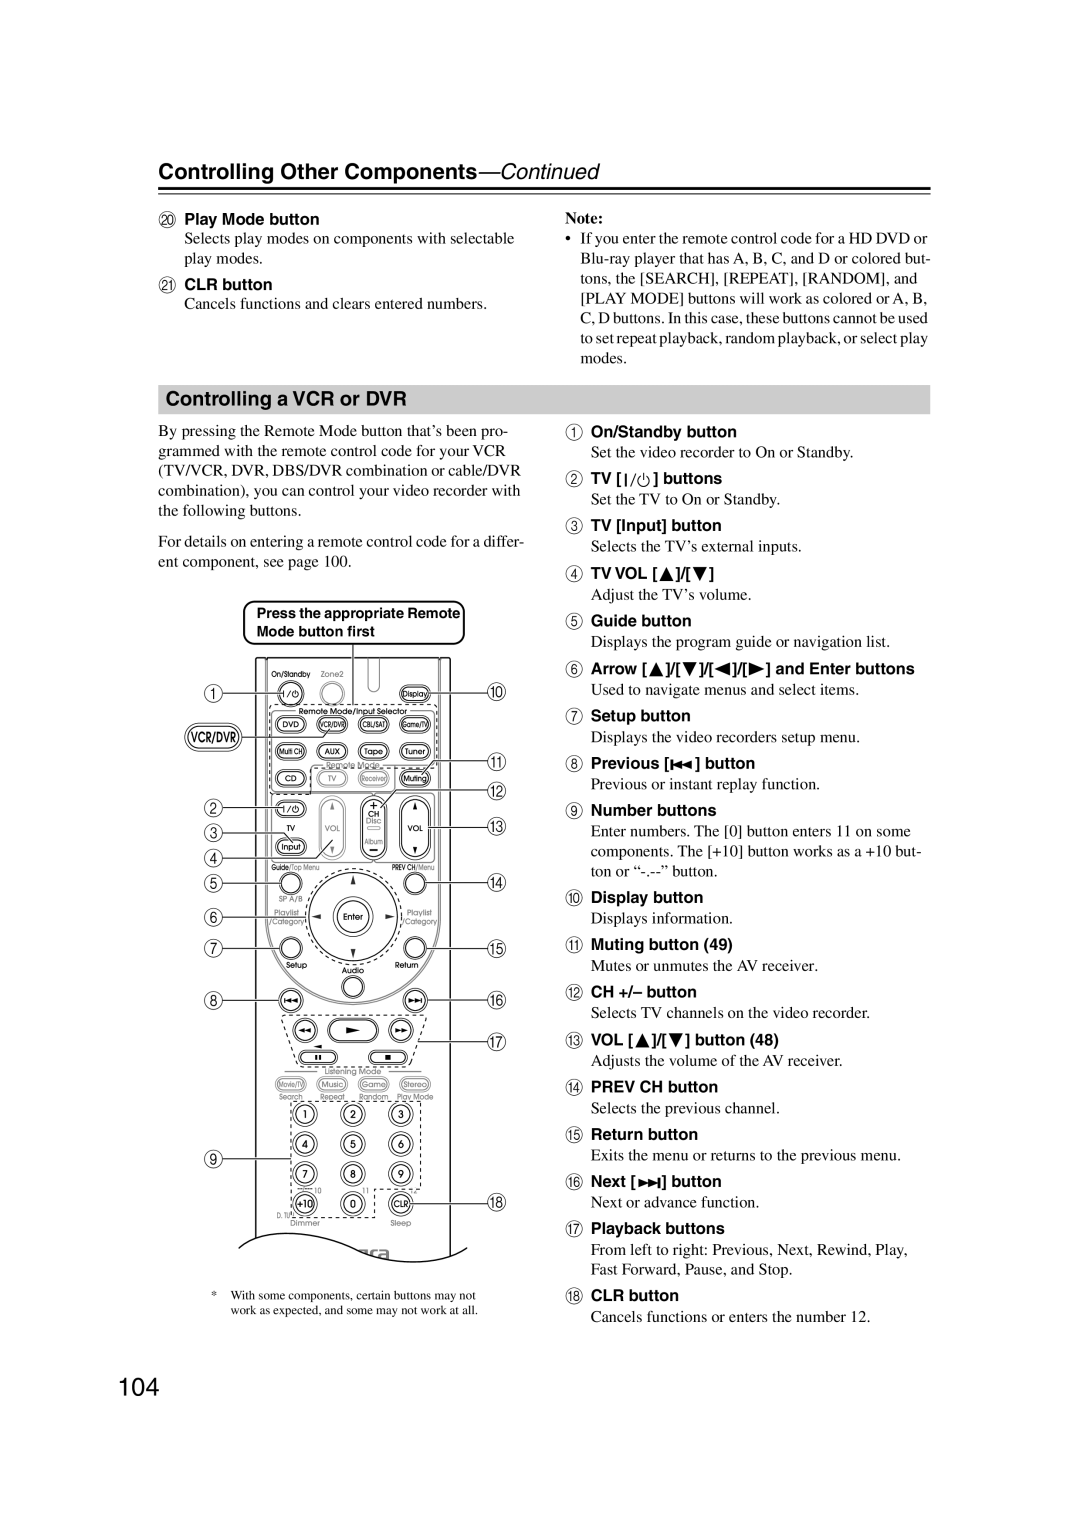 Integra DTR-5.9 instruction manual Controlling a VCR or DVR, Controlling Other Components—Continued 